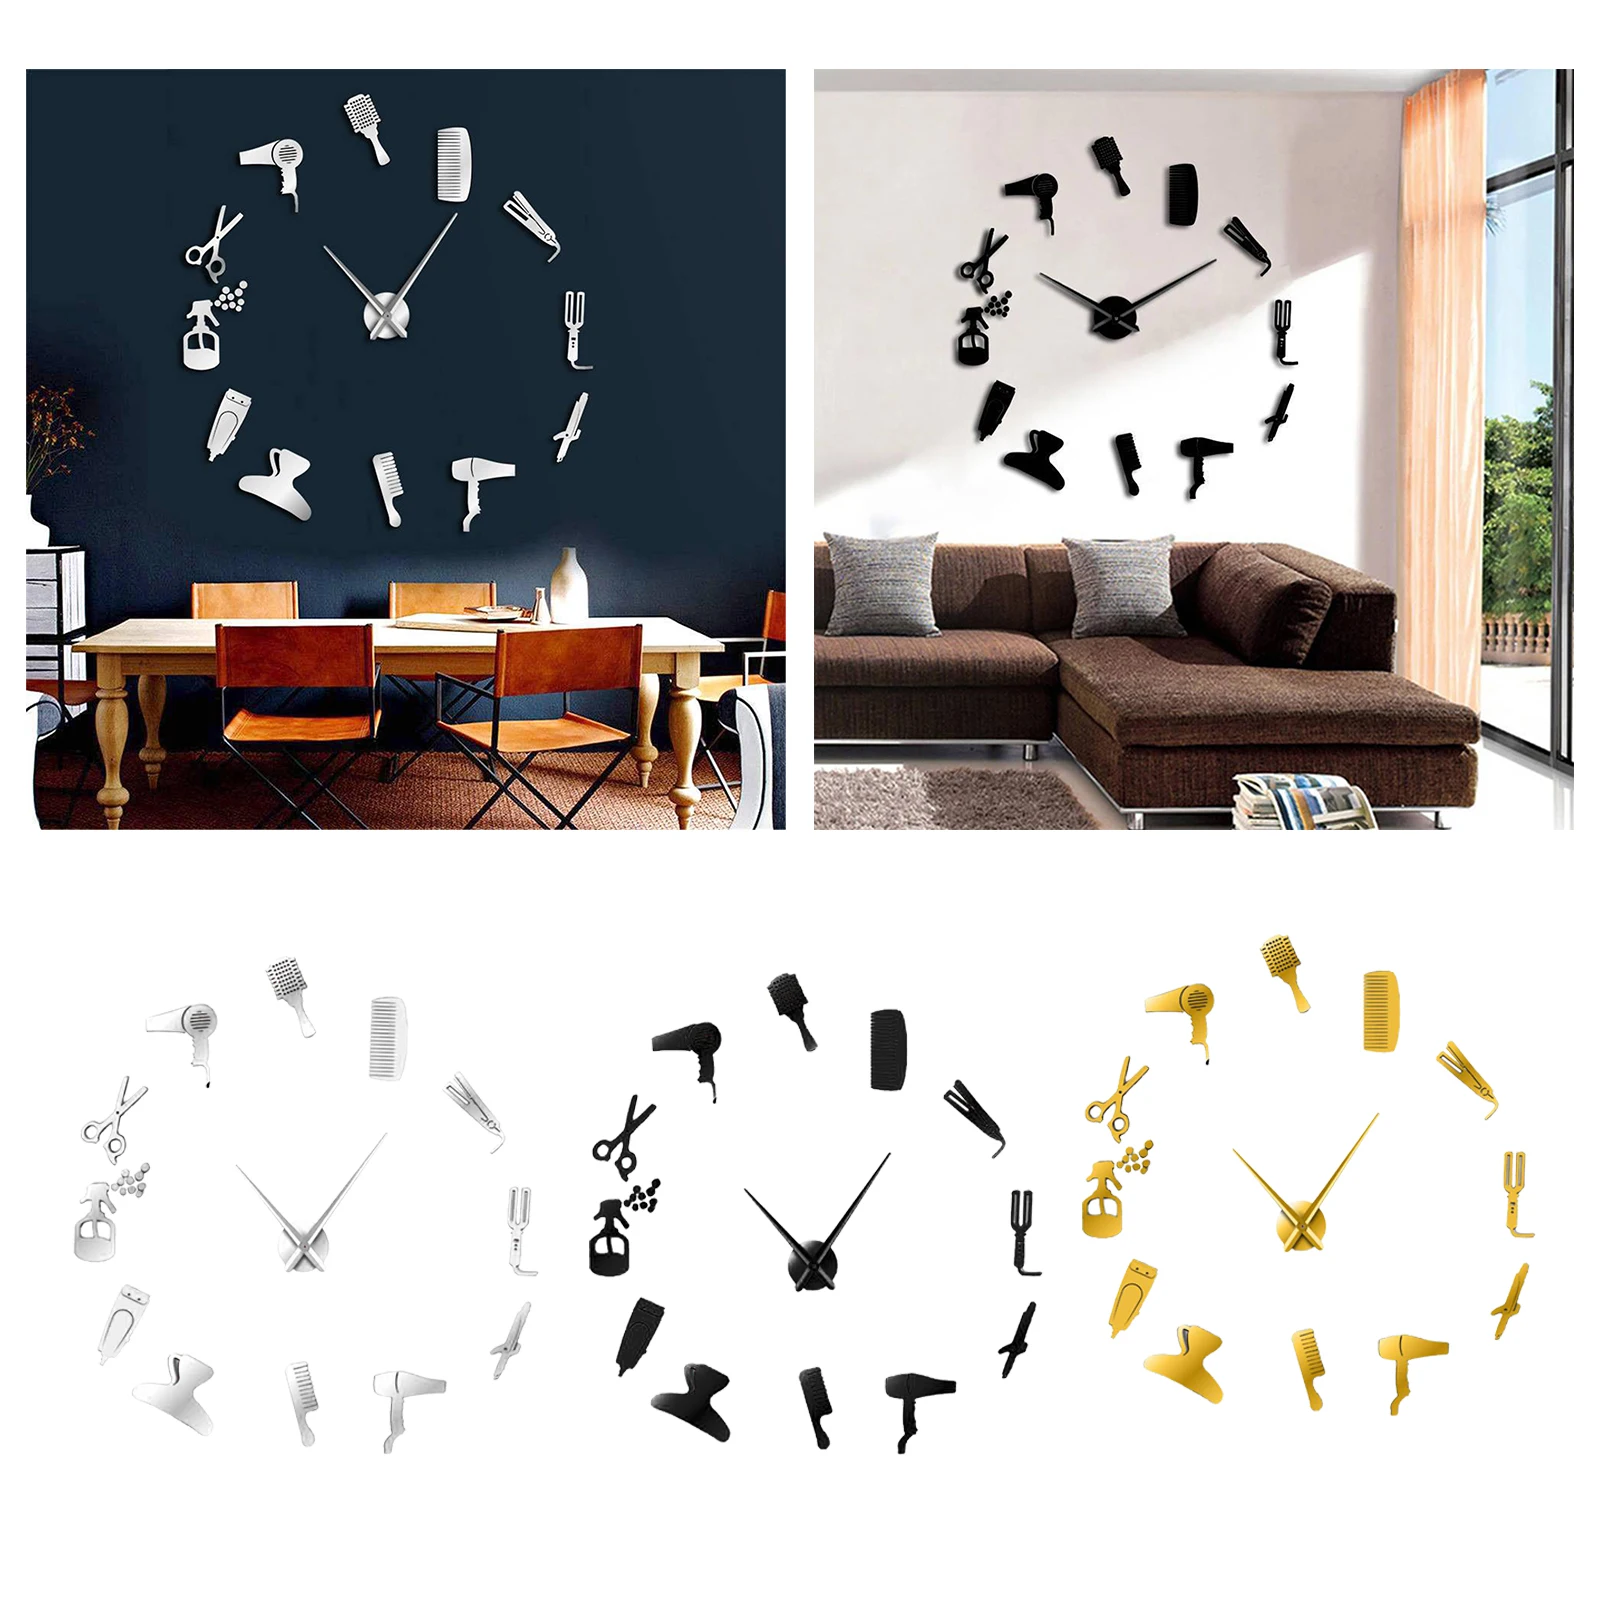 Acrylic Mirror DIY Wall Clock Watch 3D Wall Stickers Large for Living Room Bedroom Office